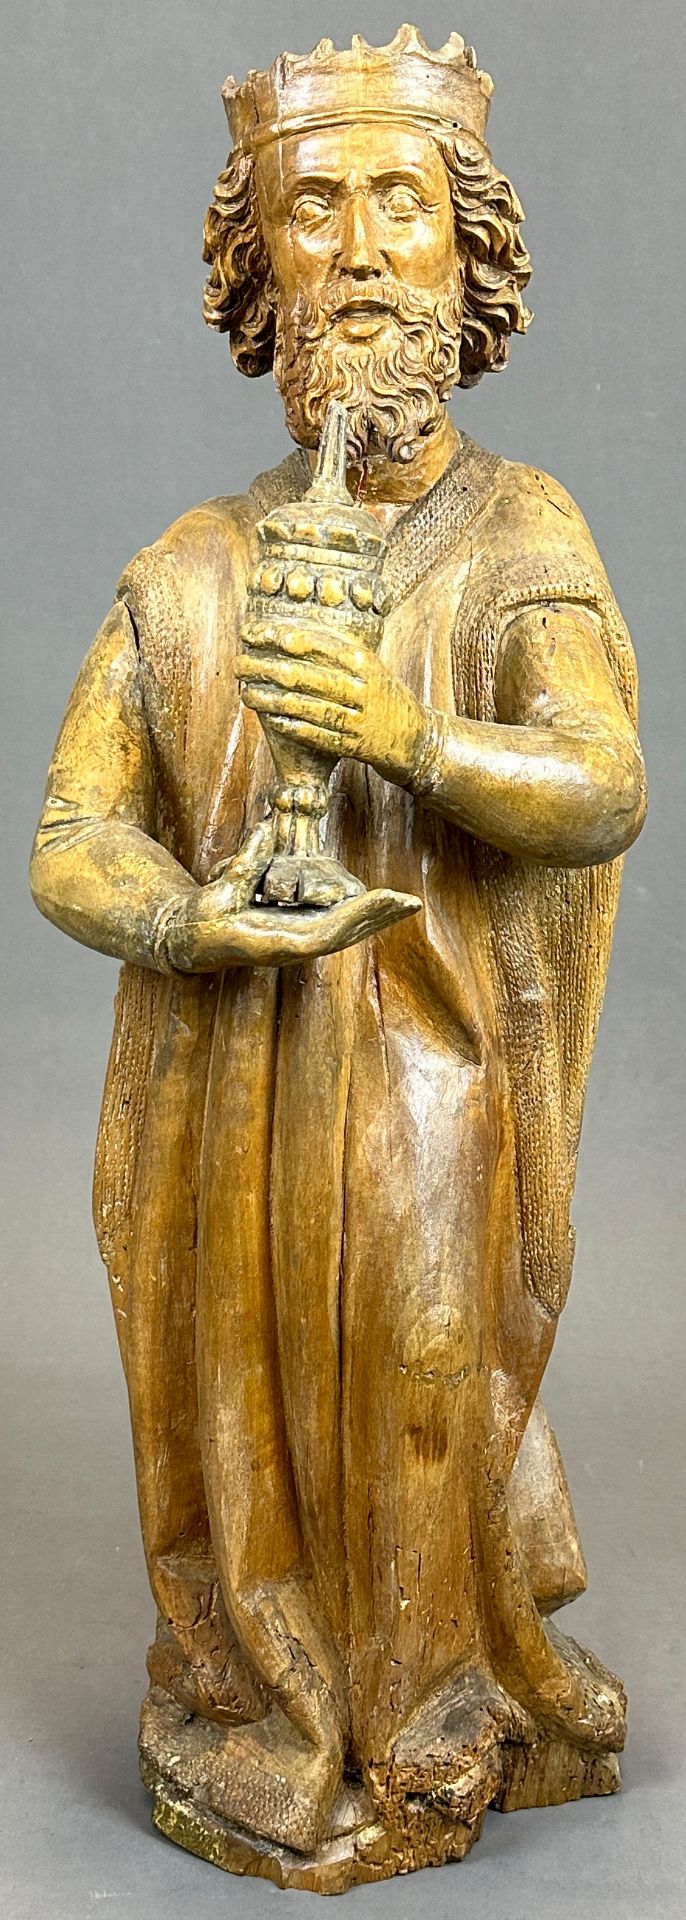 Wooden figure. St King from the Adoration. Around 1500. South Germany.